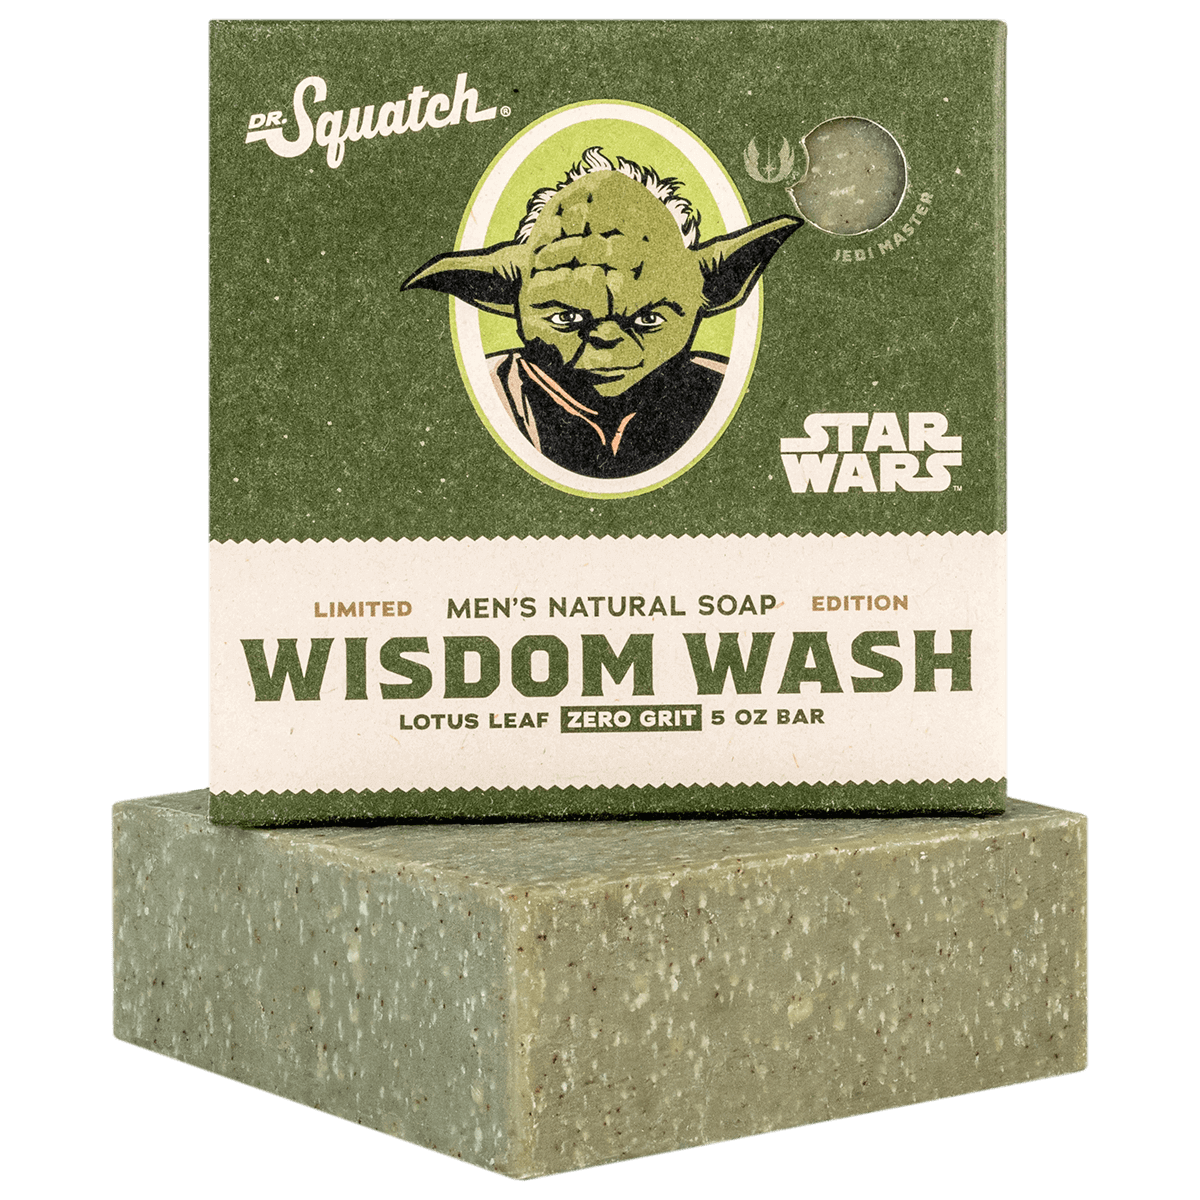 Prime your pits for scentventure - Dr. Squatch Soap Co